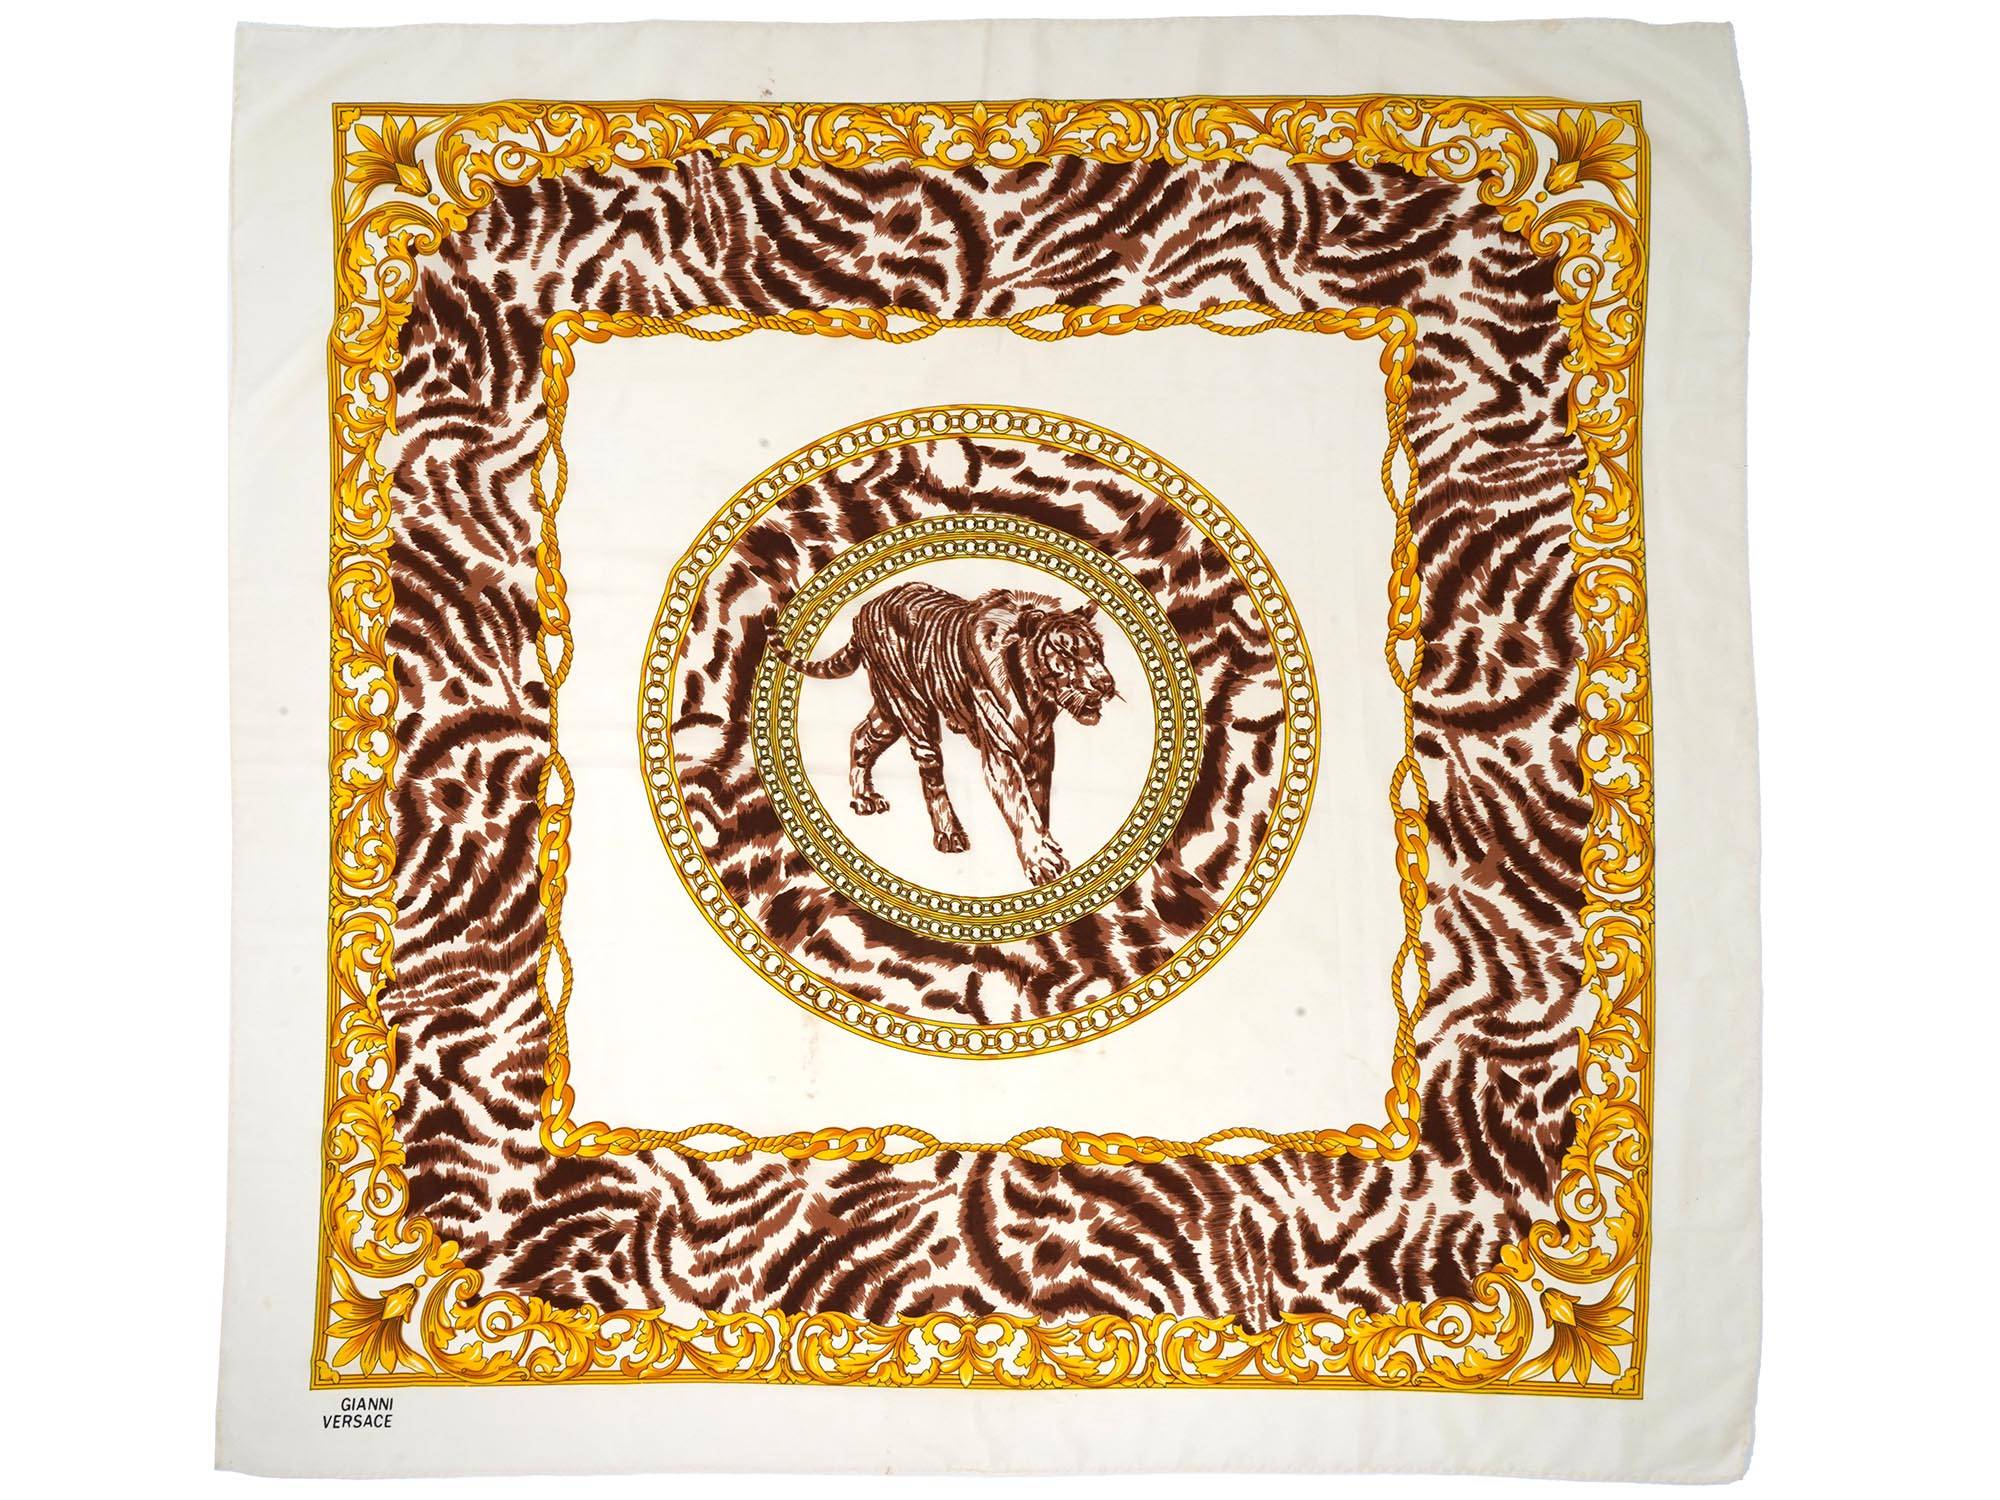 VINTAGE FRENCH VERSACE SPECIAL EDITION SILK SCARVES PIC-1